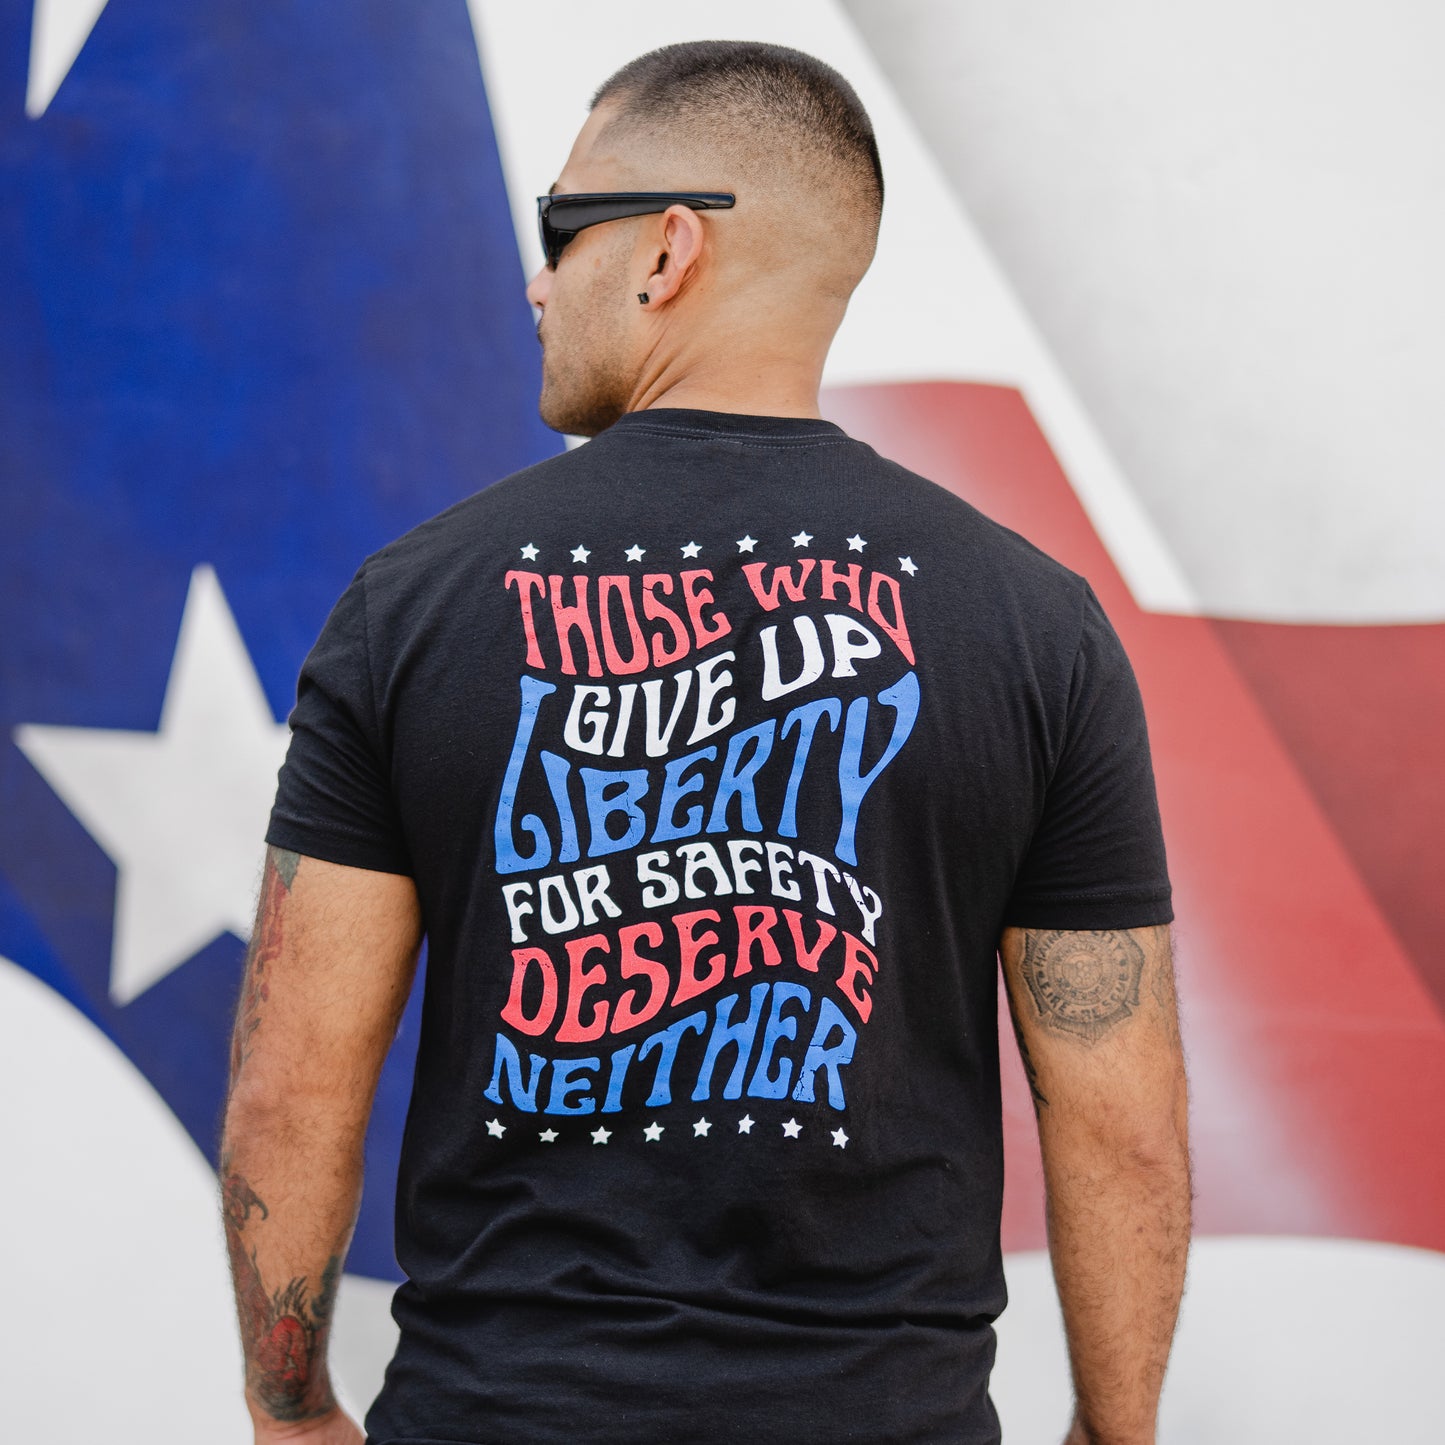 Red White and Blue Patriotic Shirts 